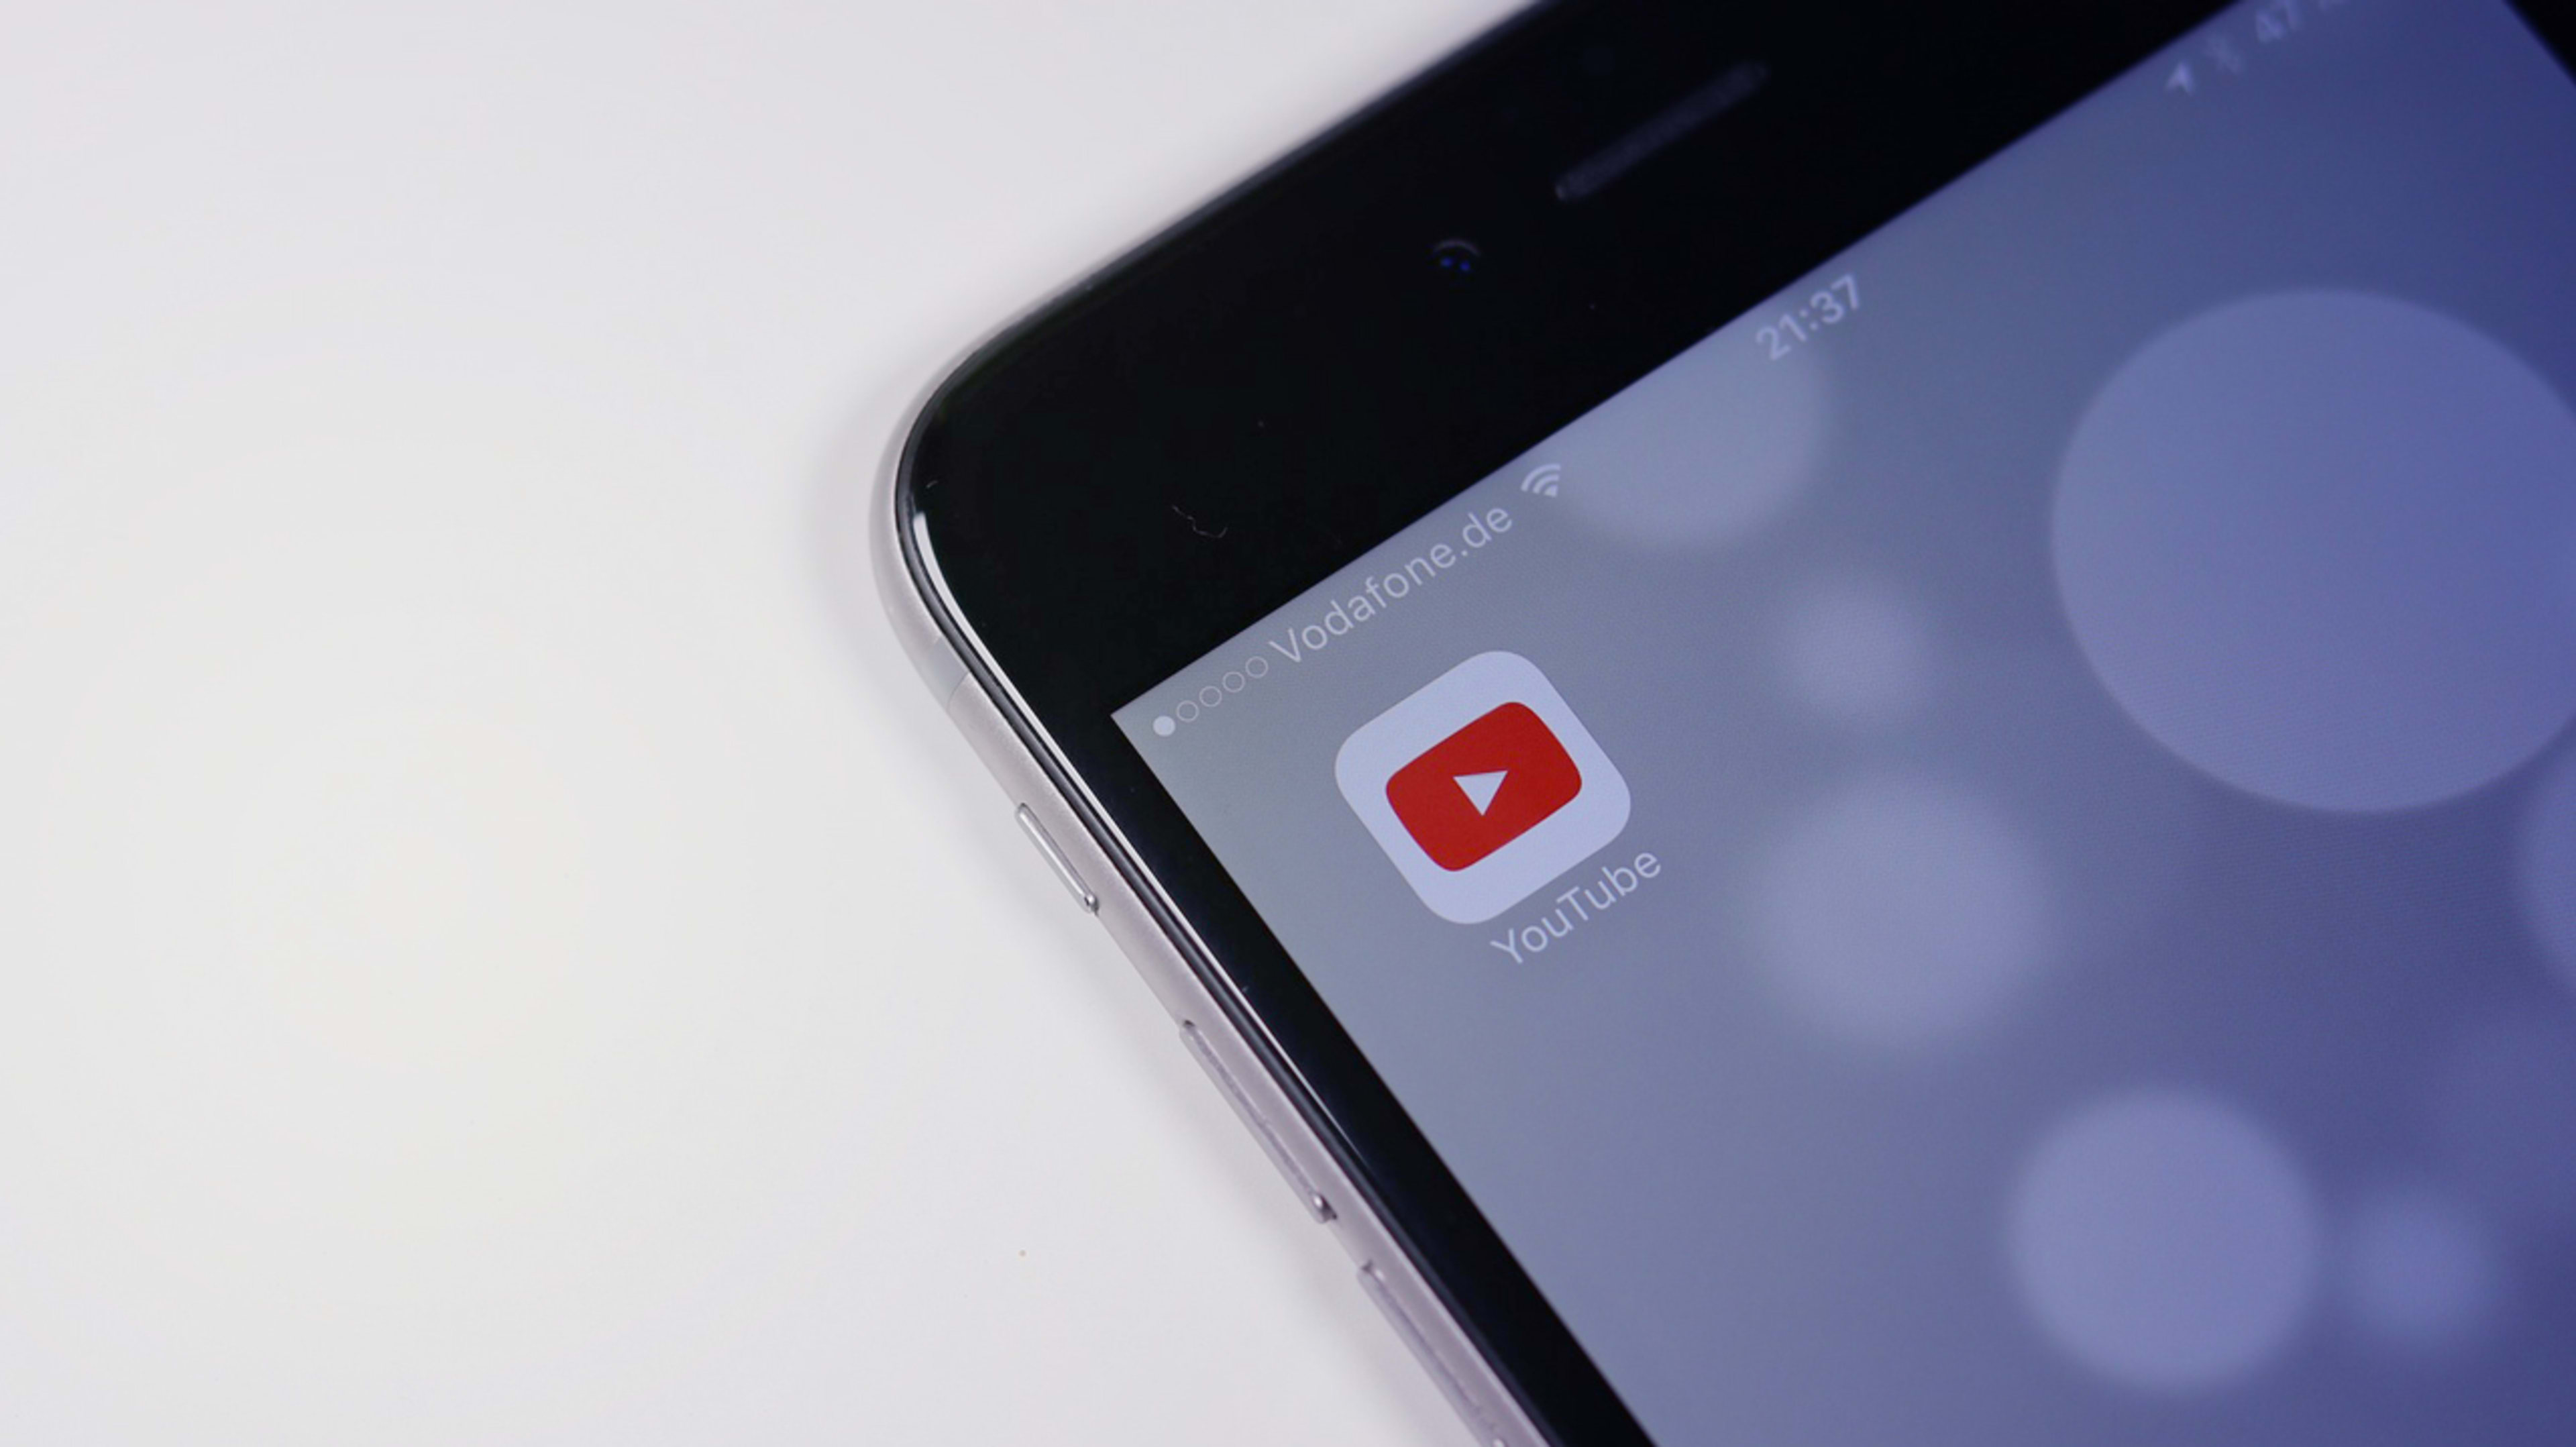 YouTube is getting ready to launch two new subscription services